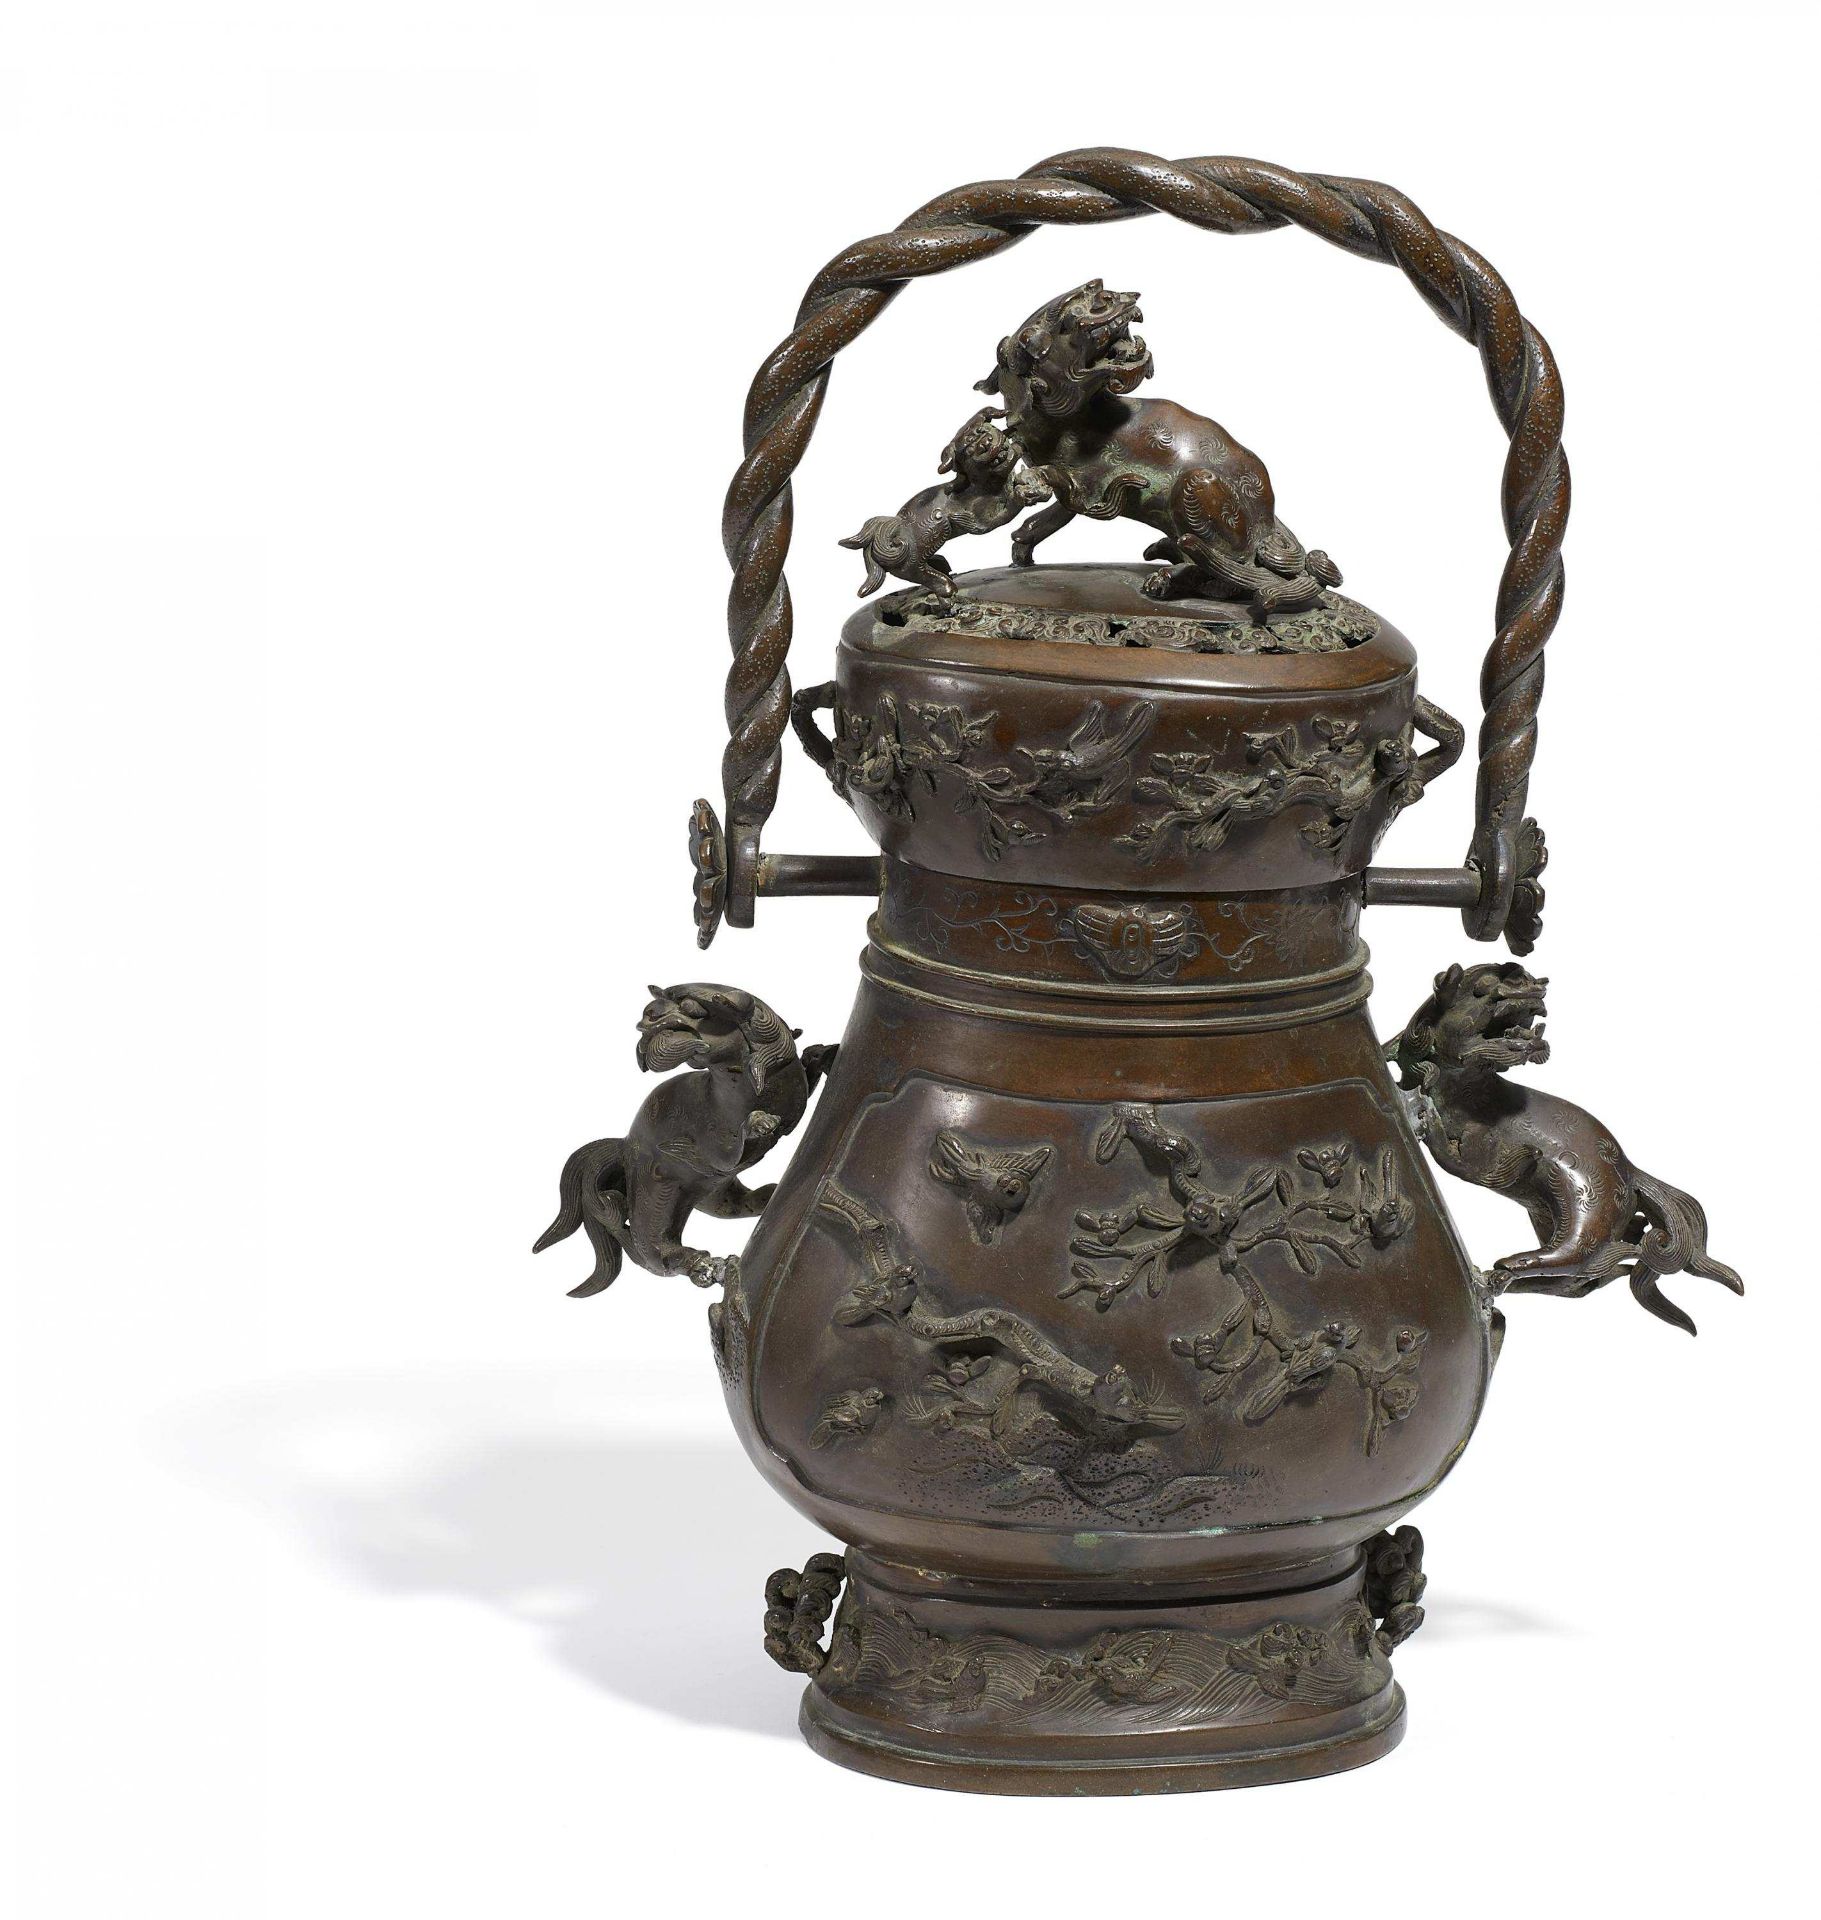 CENSER WITH HANDLE. Japan. Meiji period. Bronze with dark patina. In the shape of a somewhat